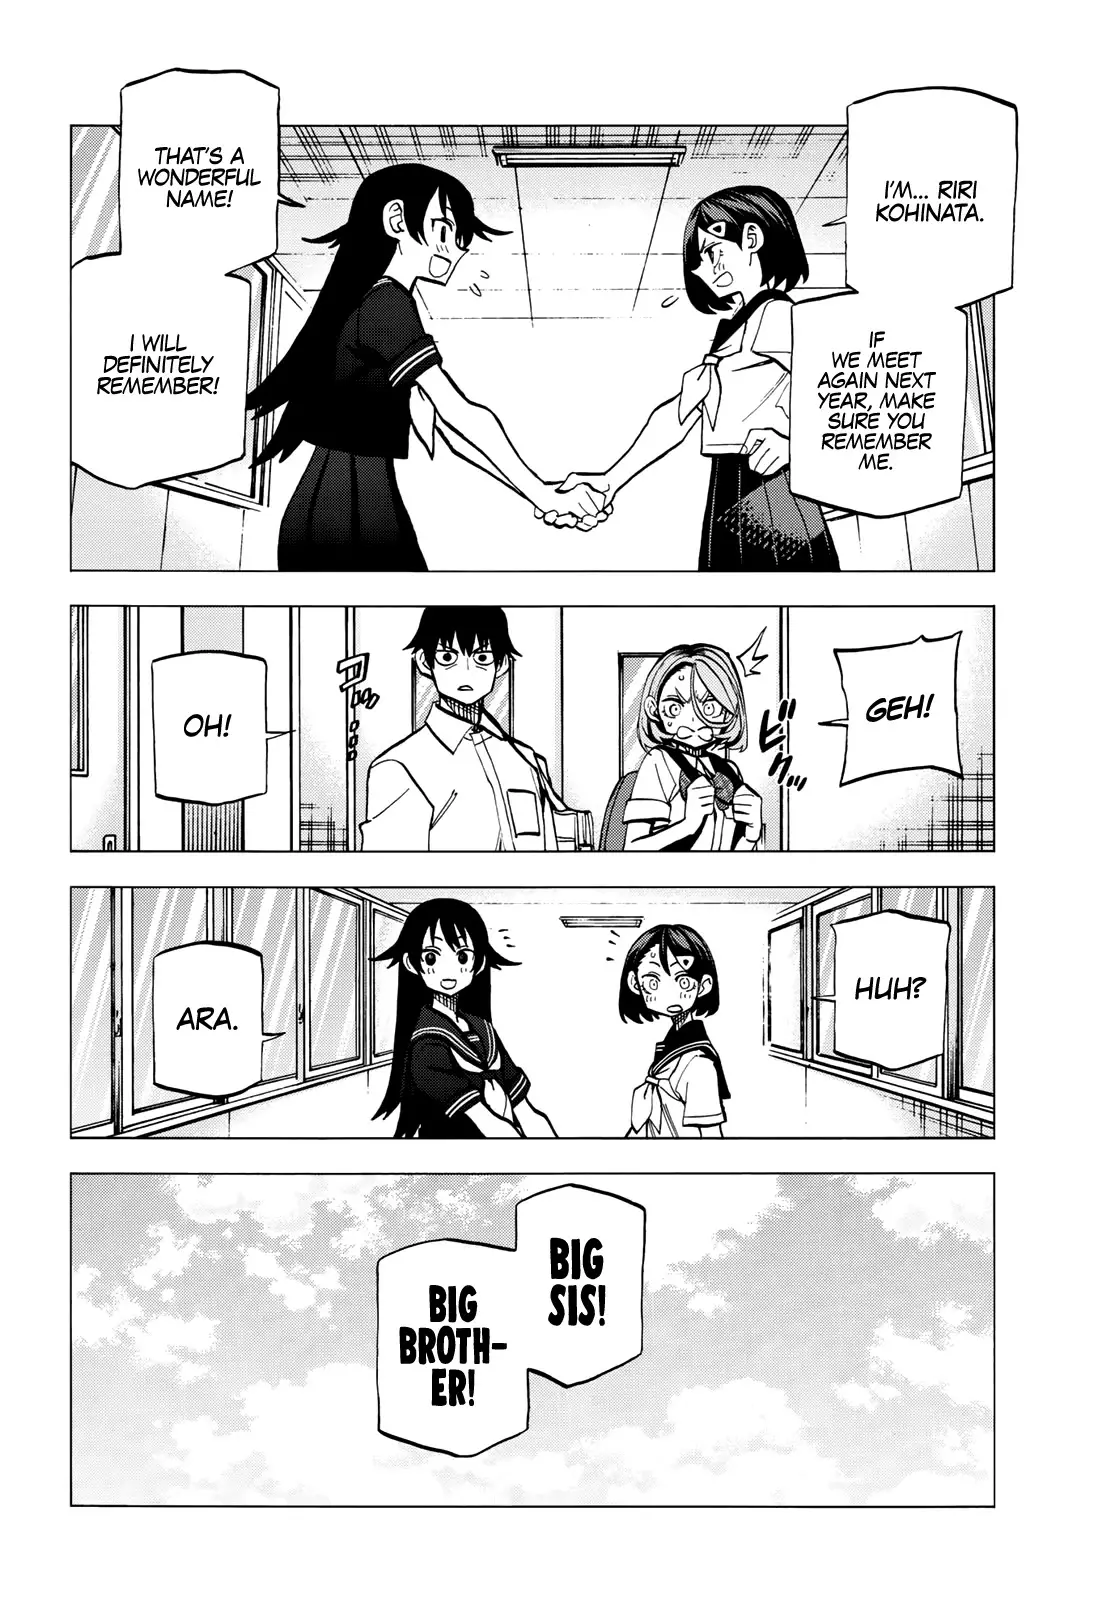 The Story Between A Dumb Prefect And A High School Girl With An Inappropriate Skirt Length - 11 page 21